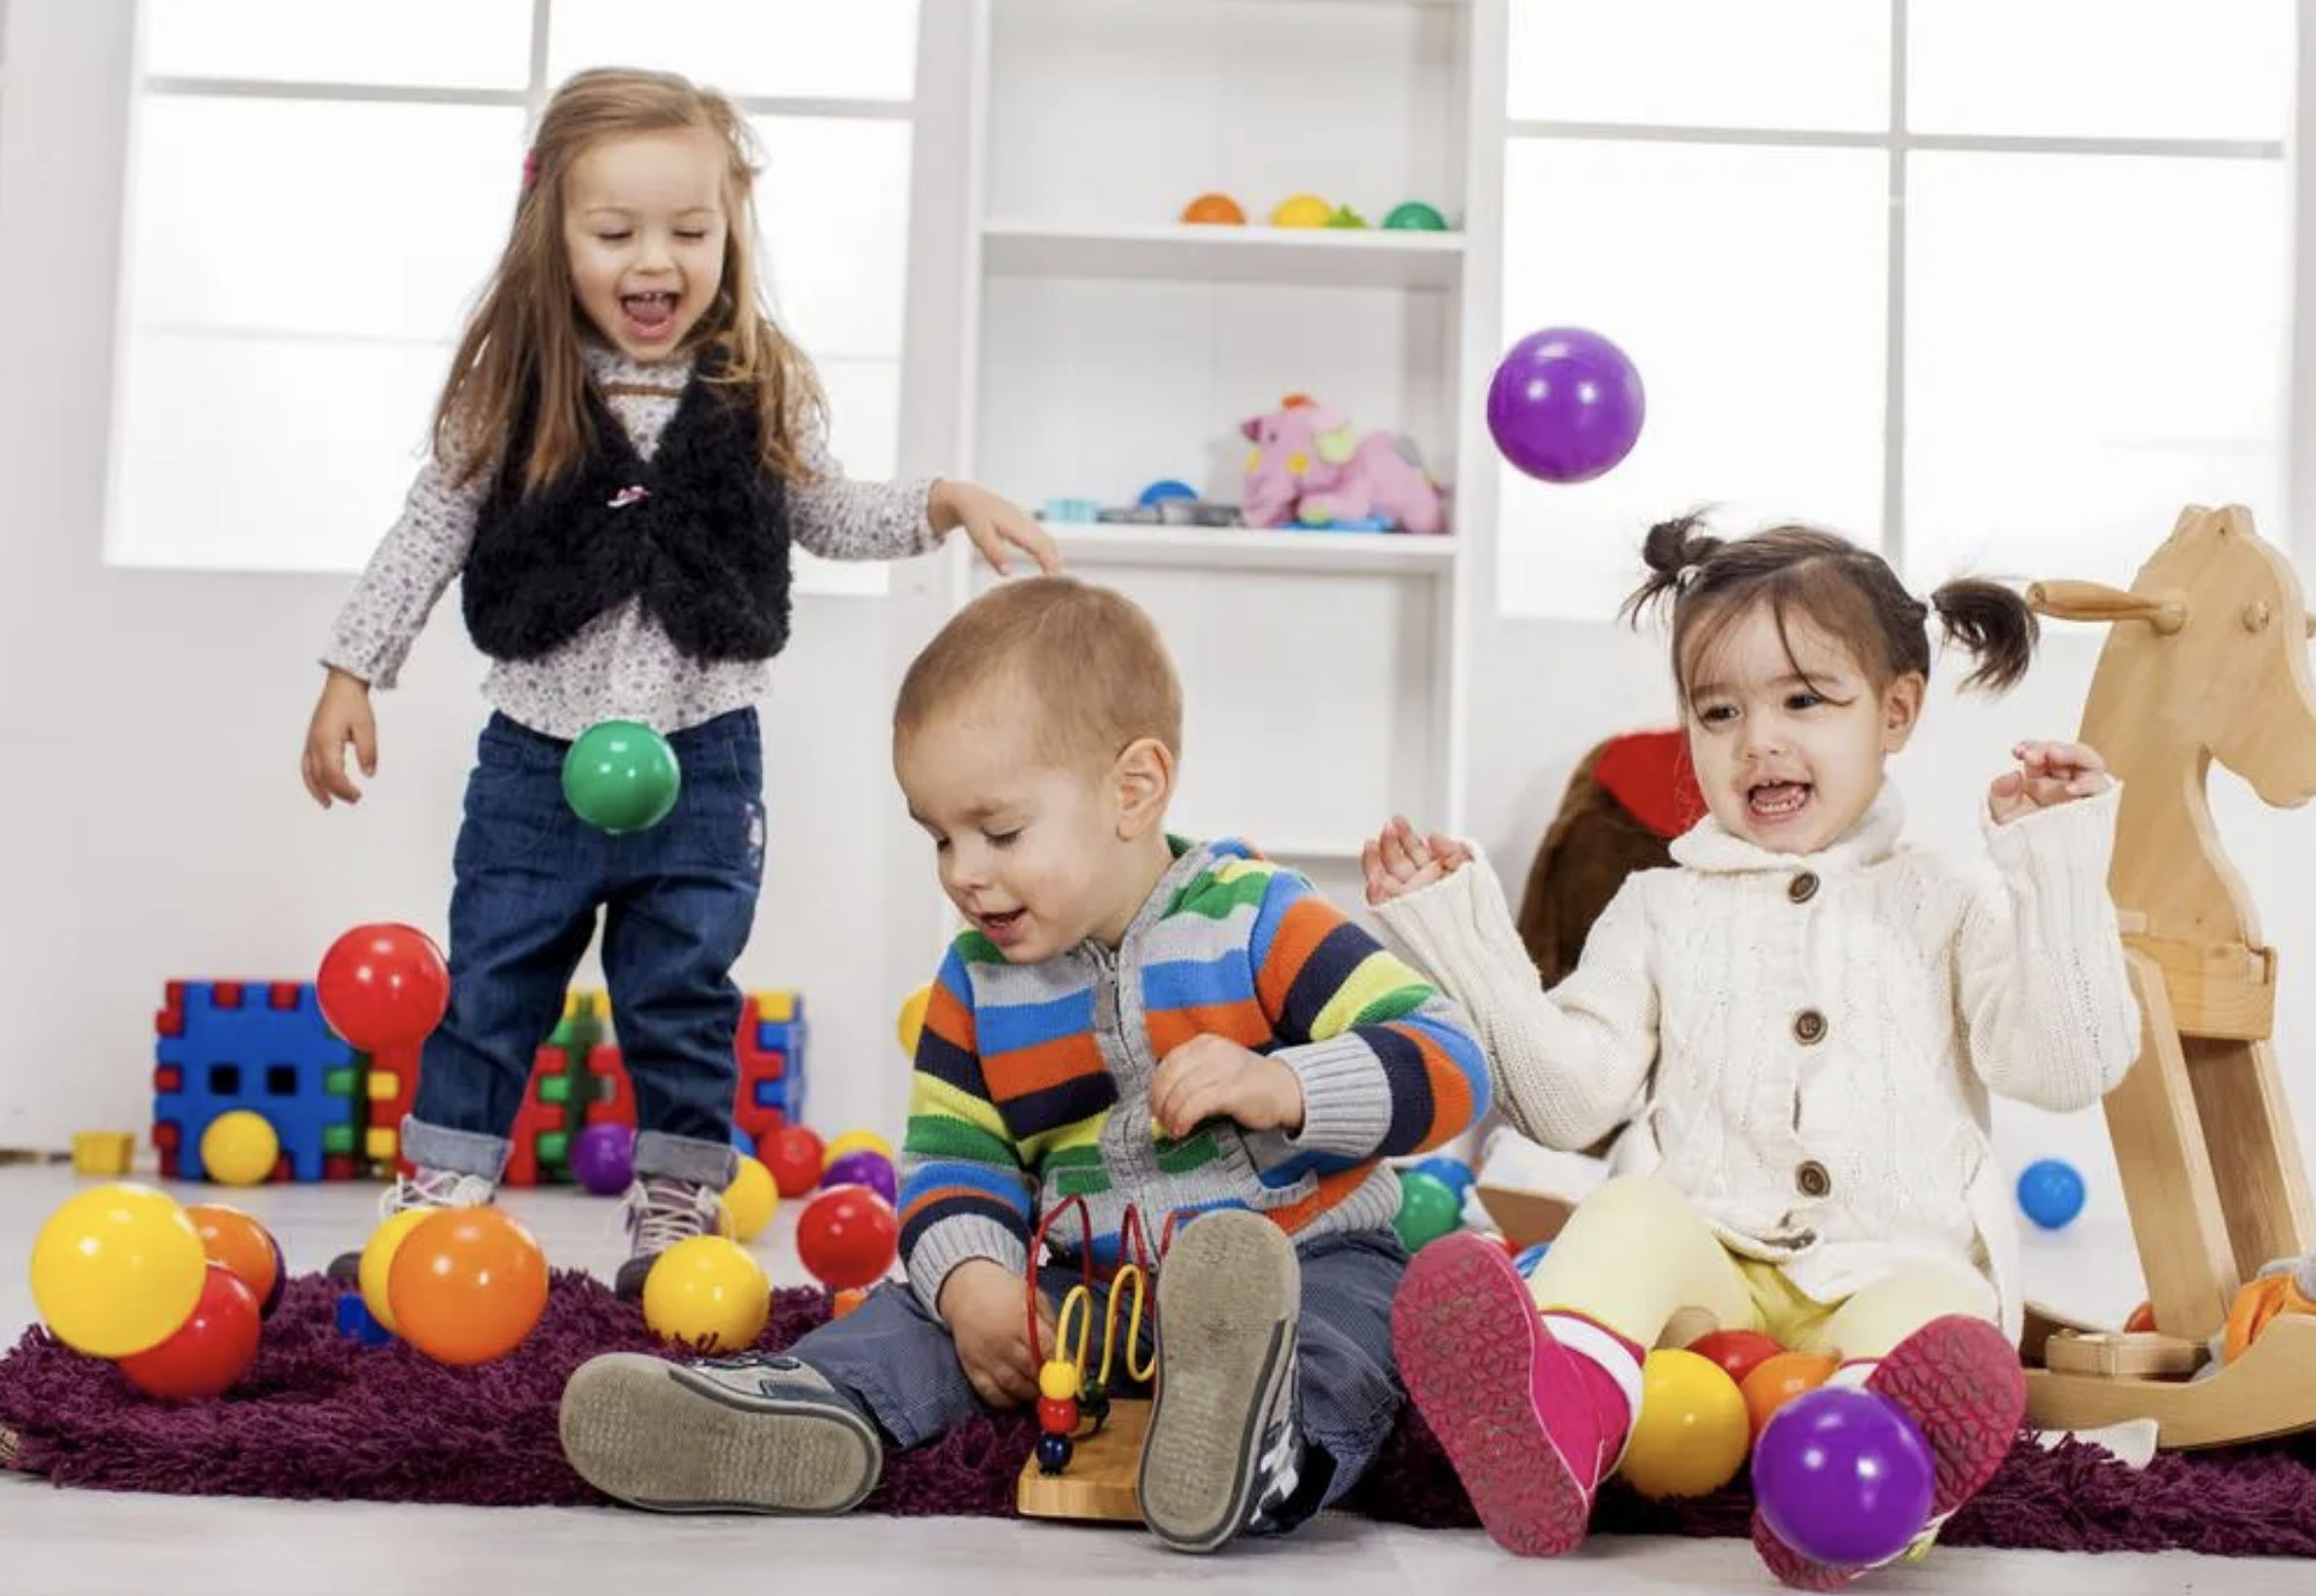 Personal Injury Lawsuits and Daycare Neglect